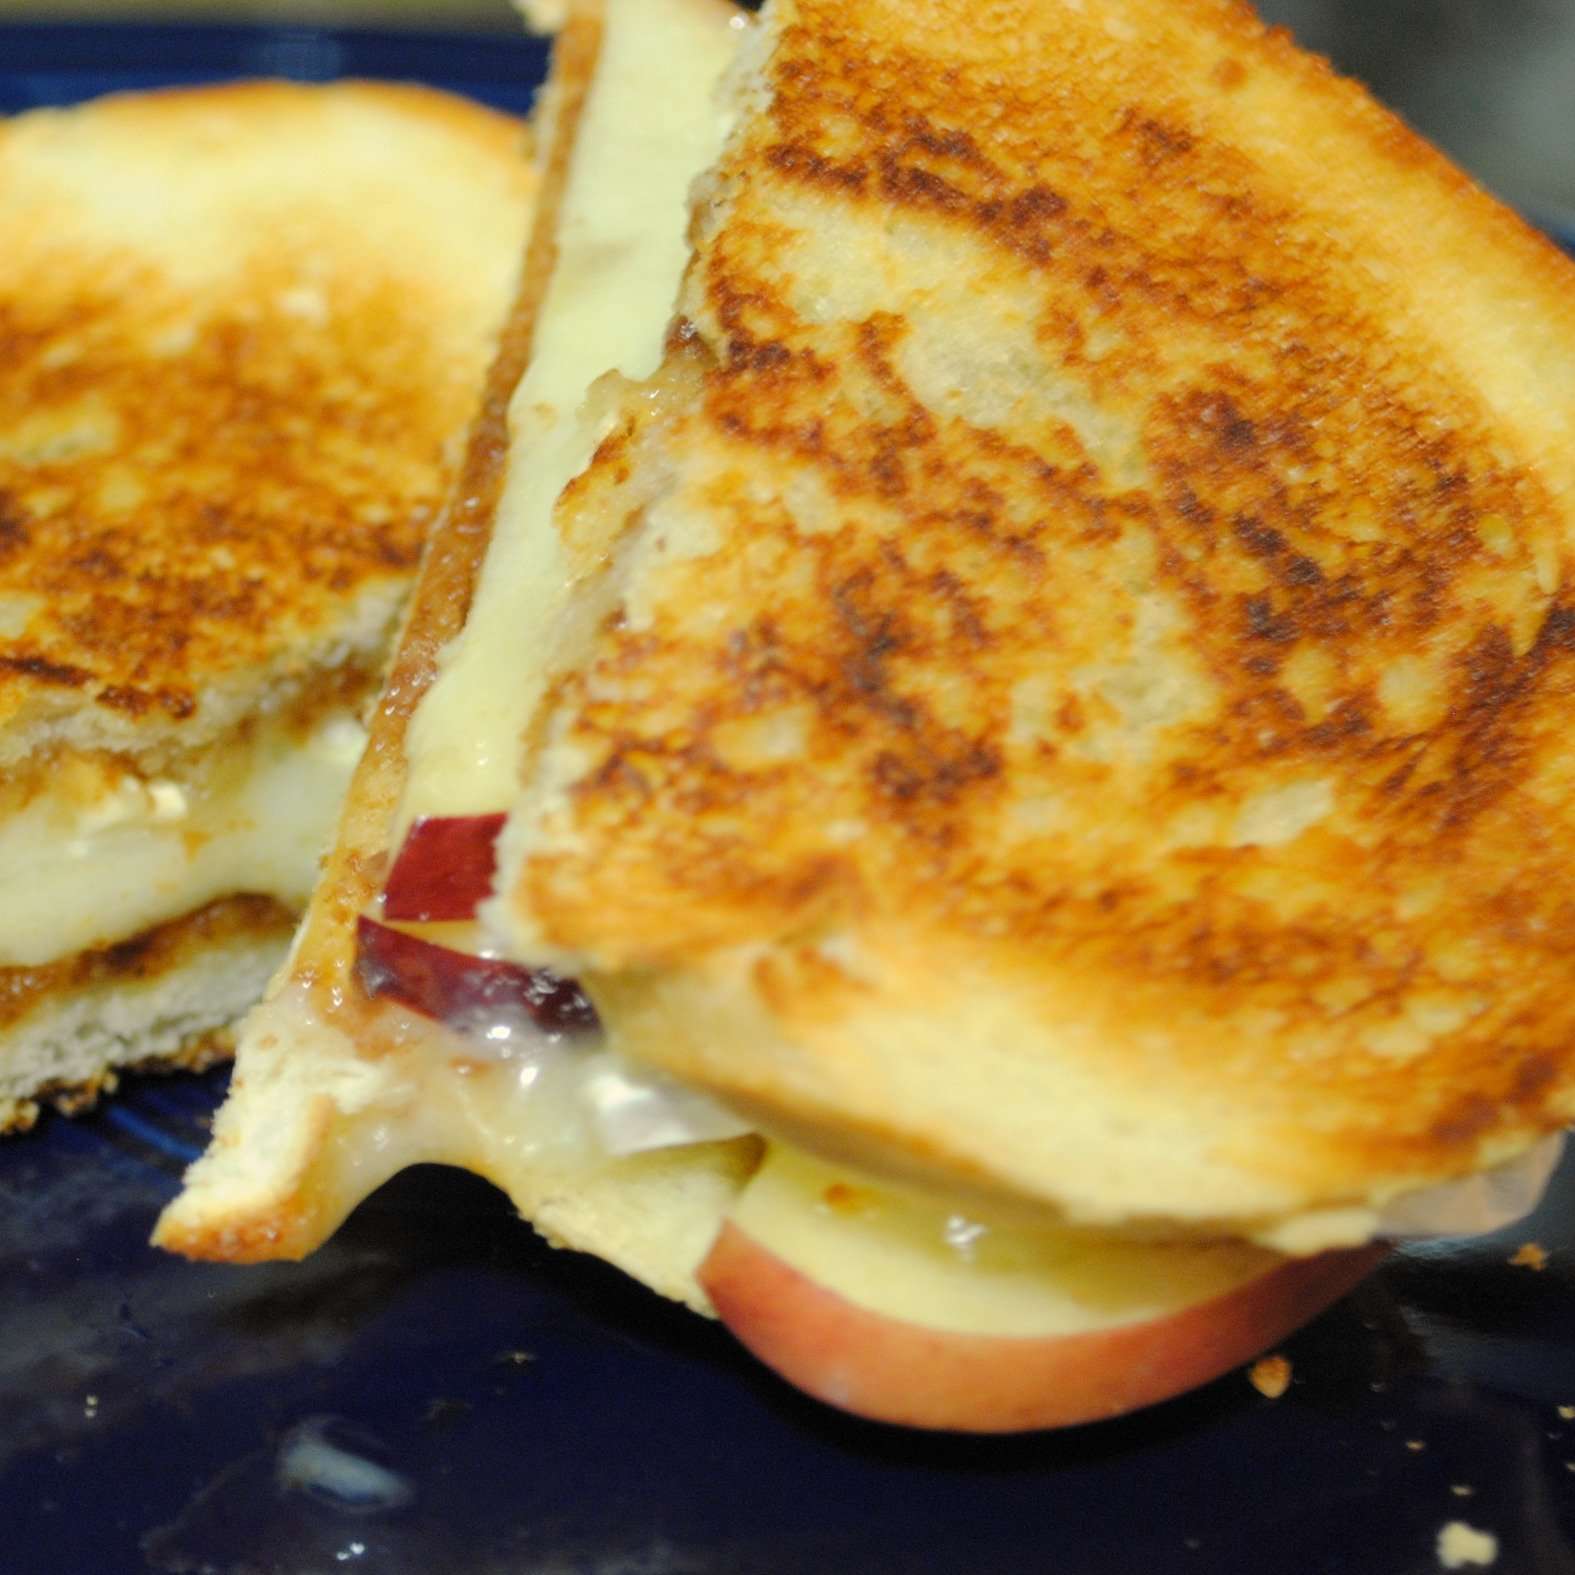 Grilled Cheese Please! 7 Simple Ways to Spice Up the Classic